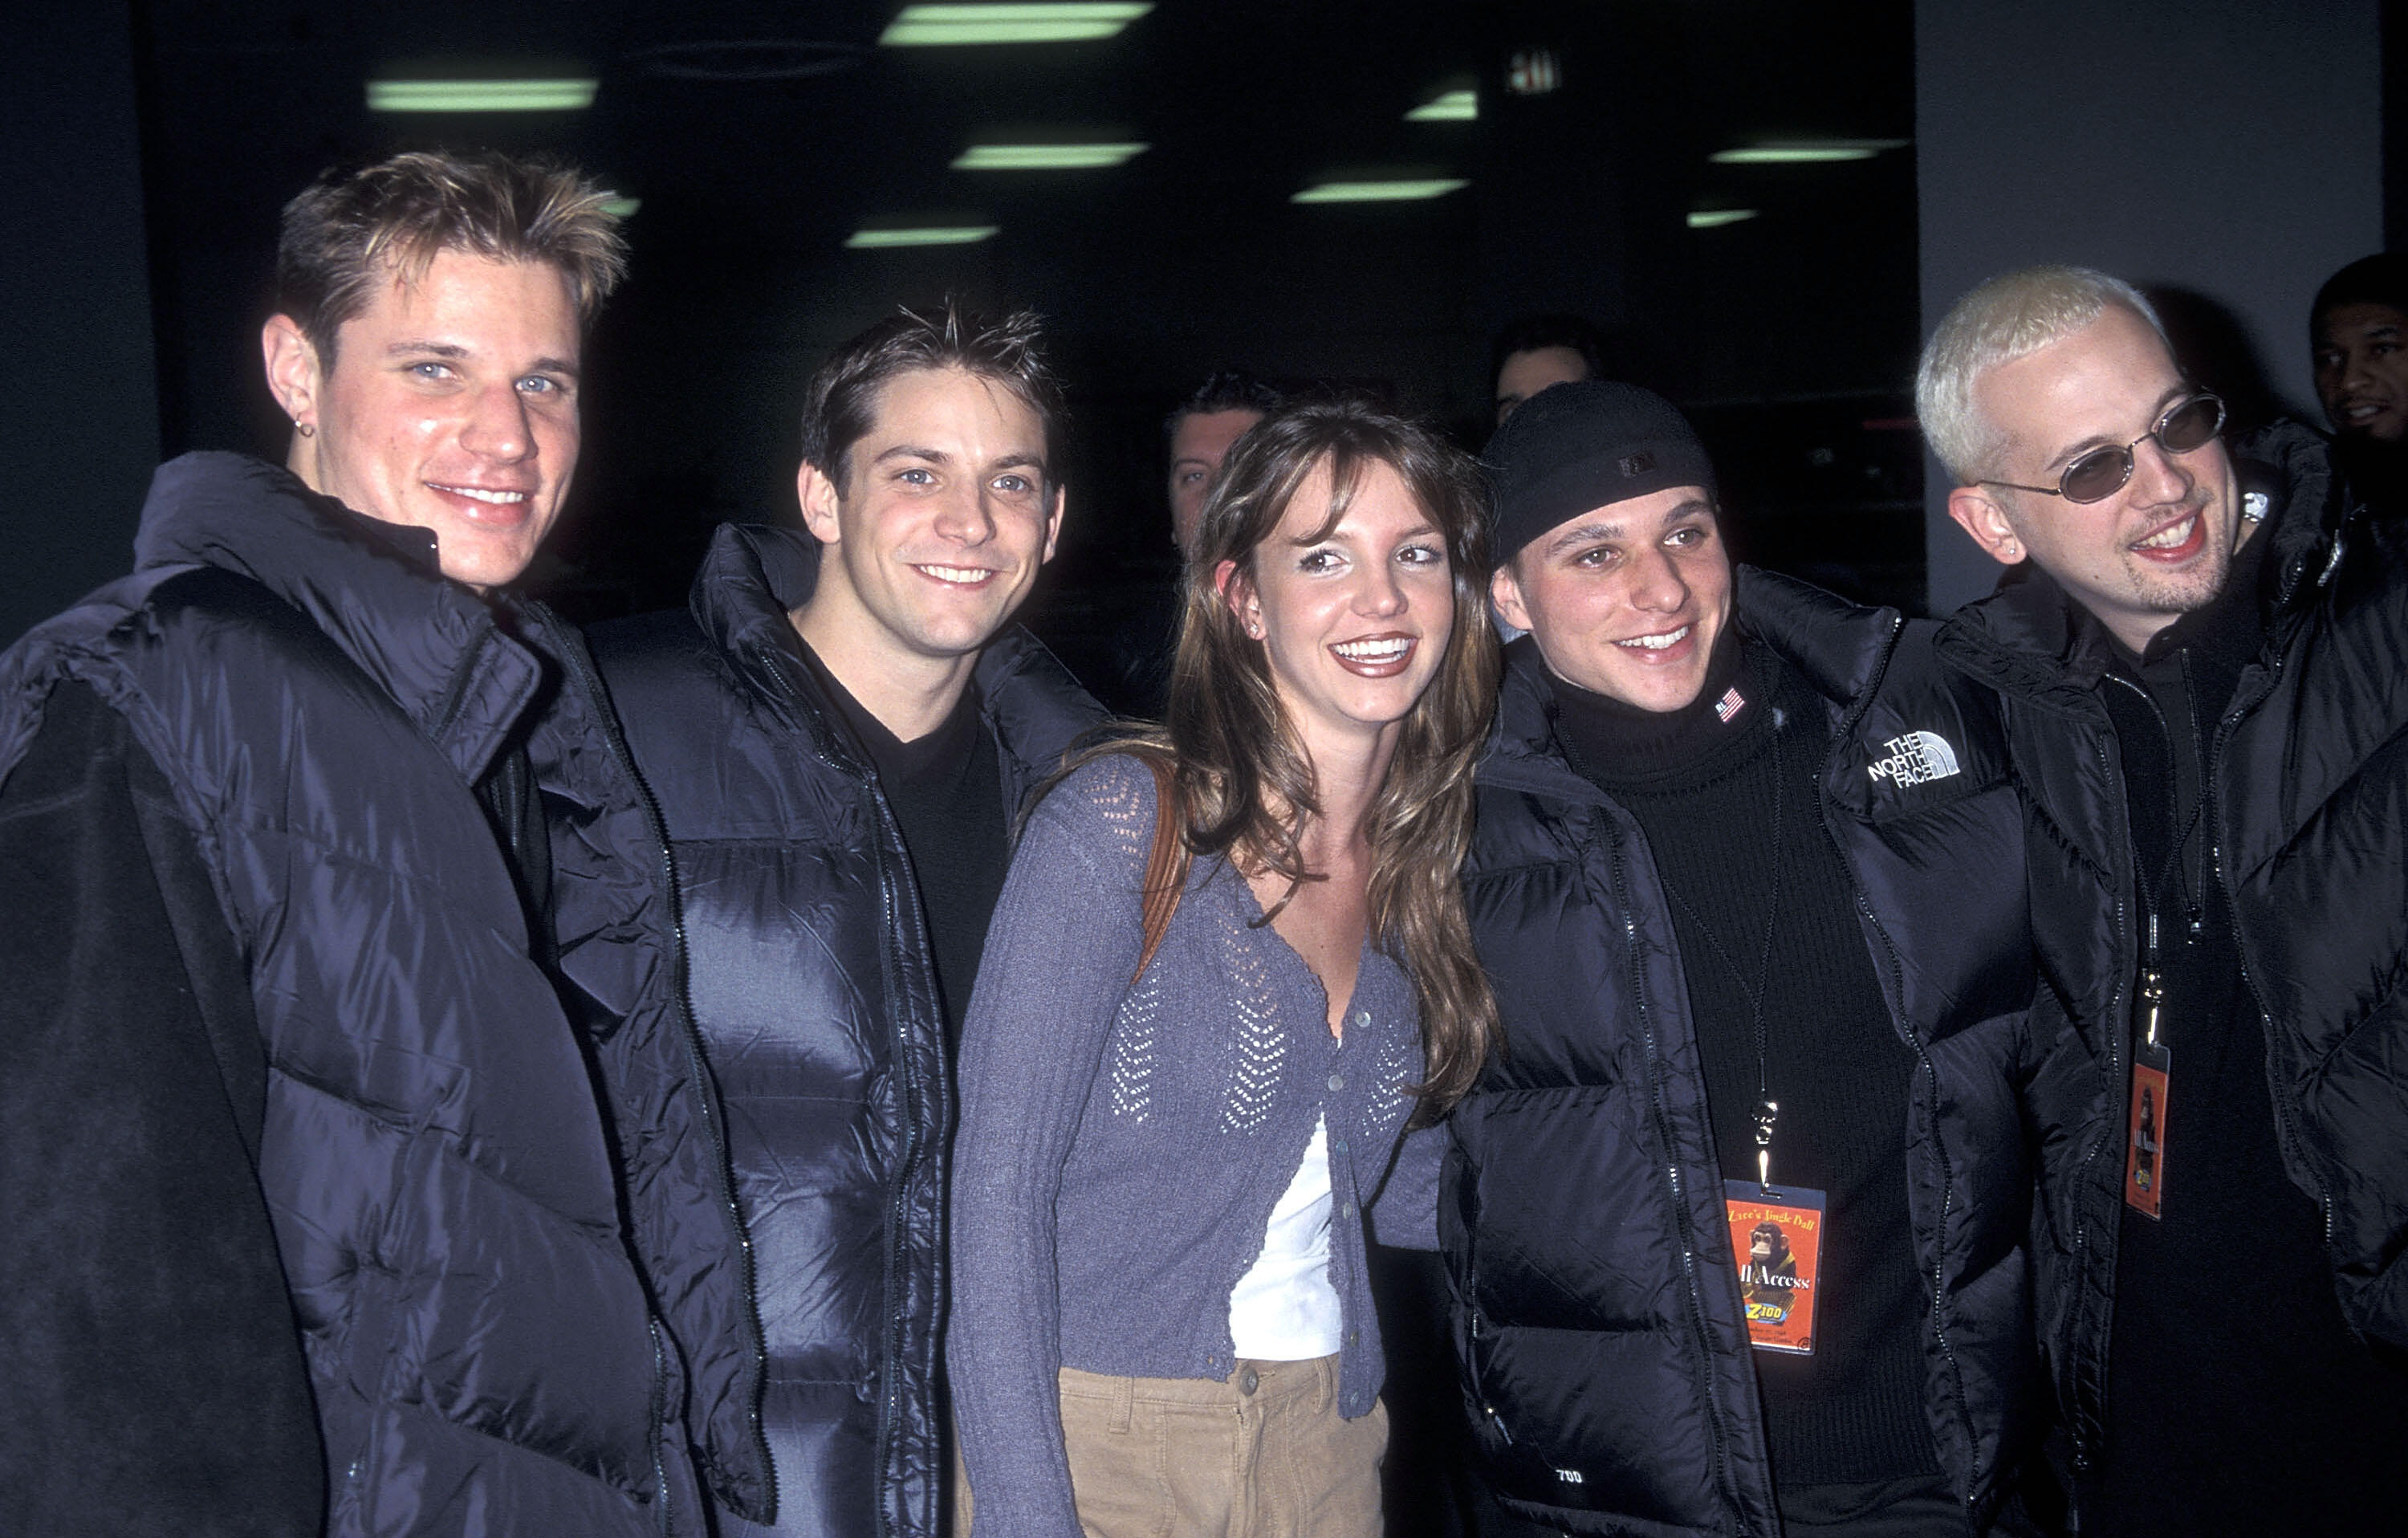 98 Degrees shares never-before-seen footage to celebrate their